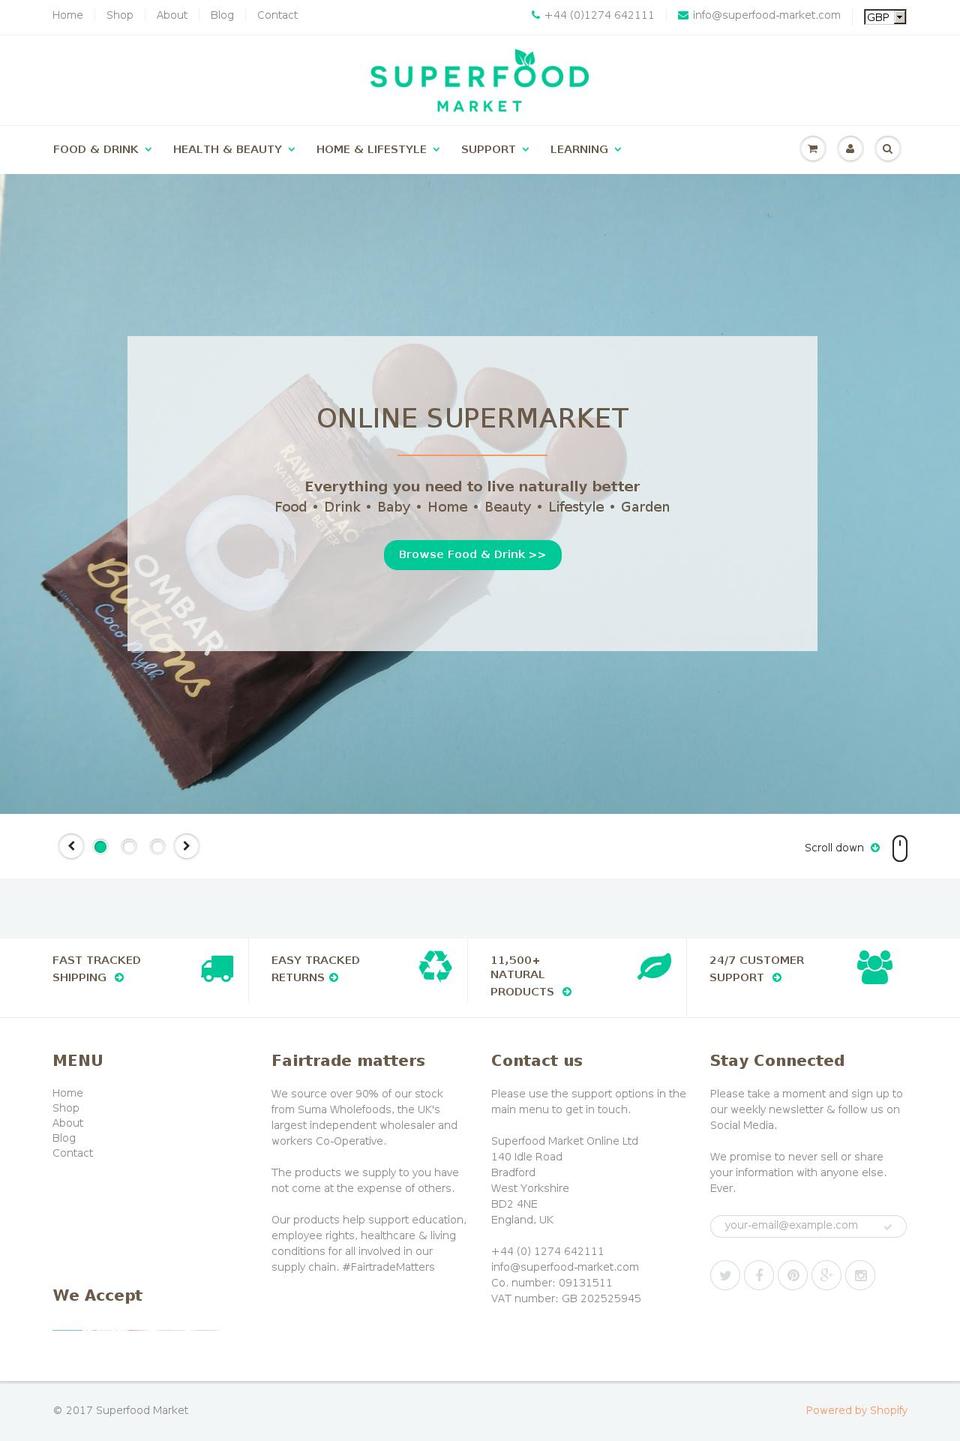 Canopy Shopify theme site example superfood-market.com